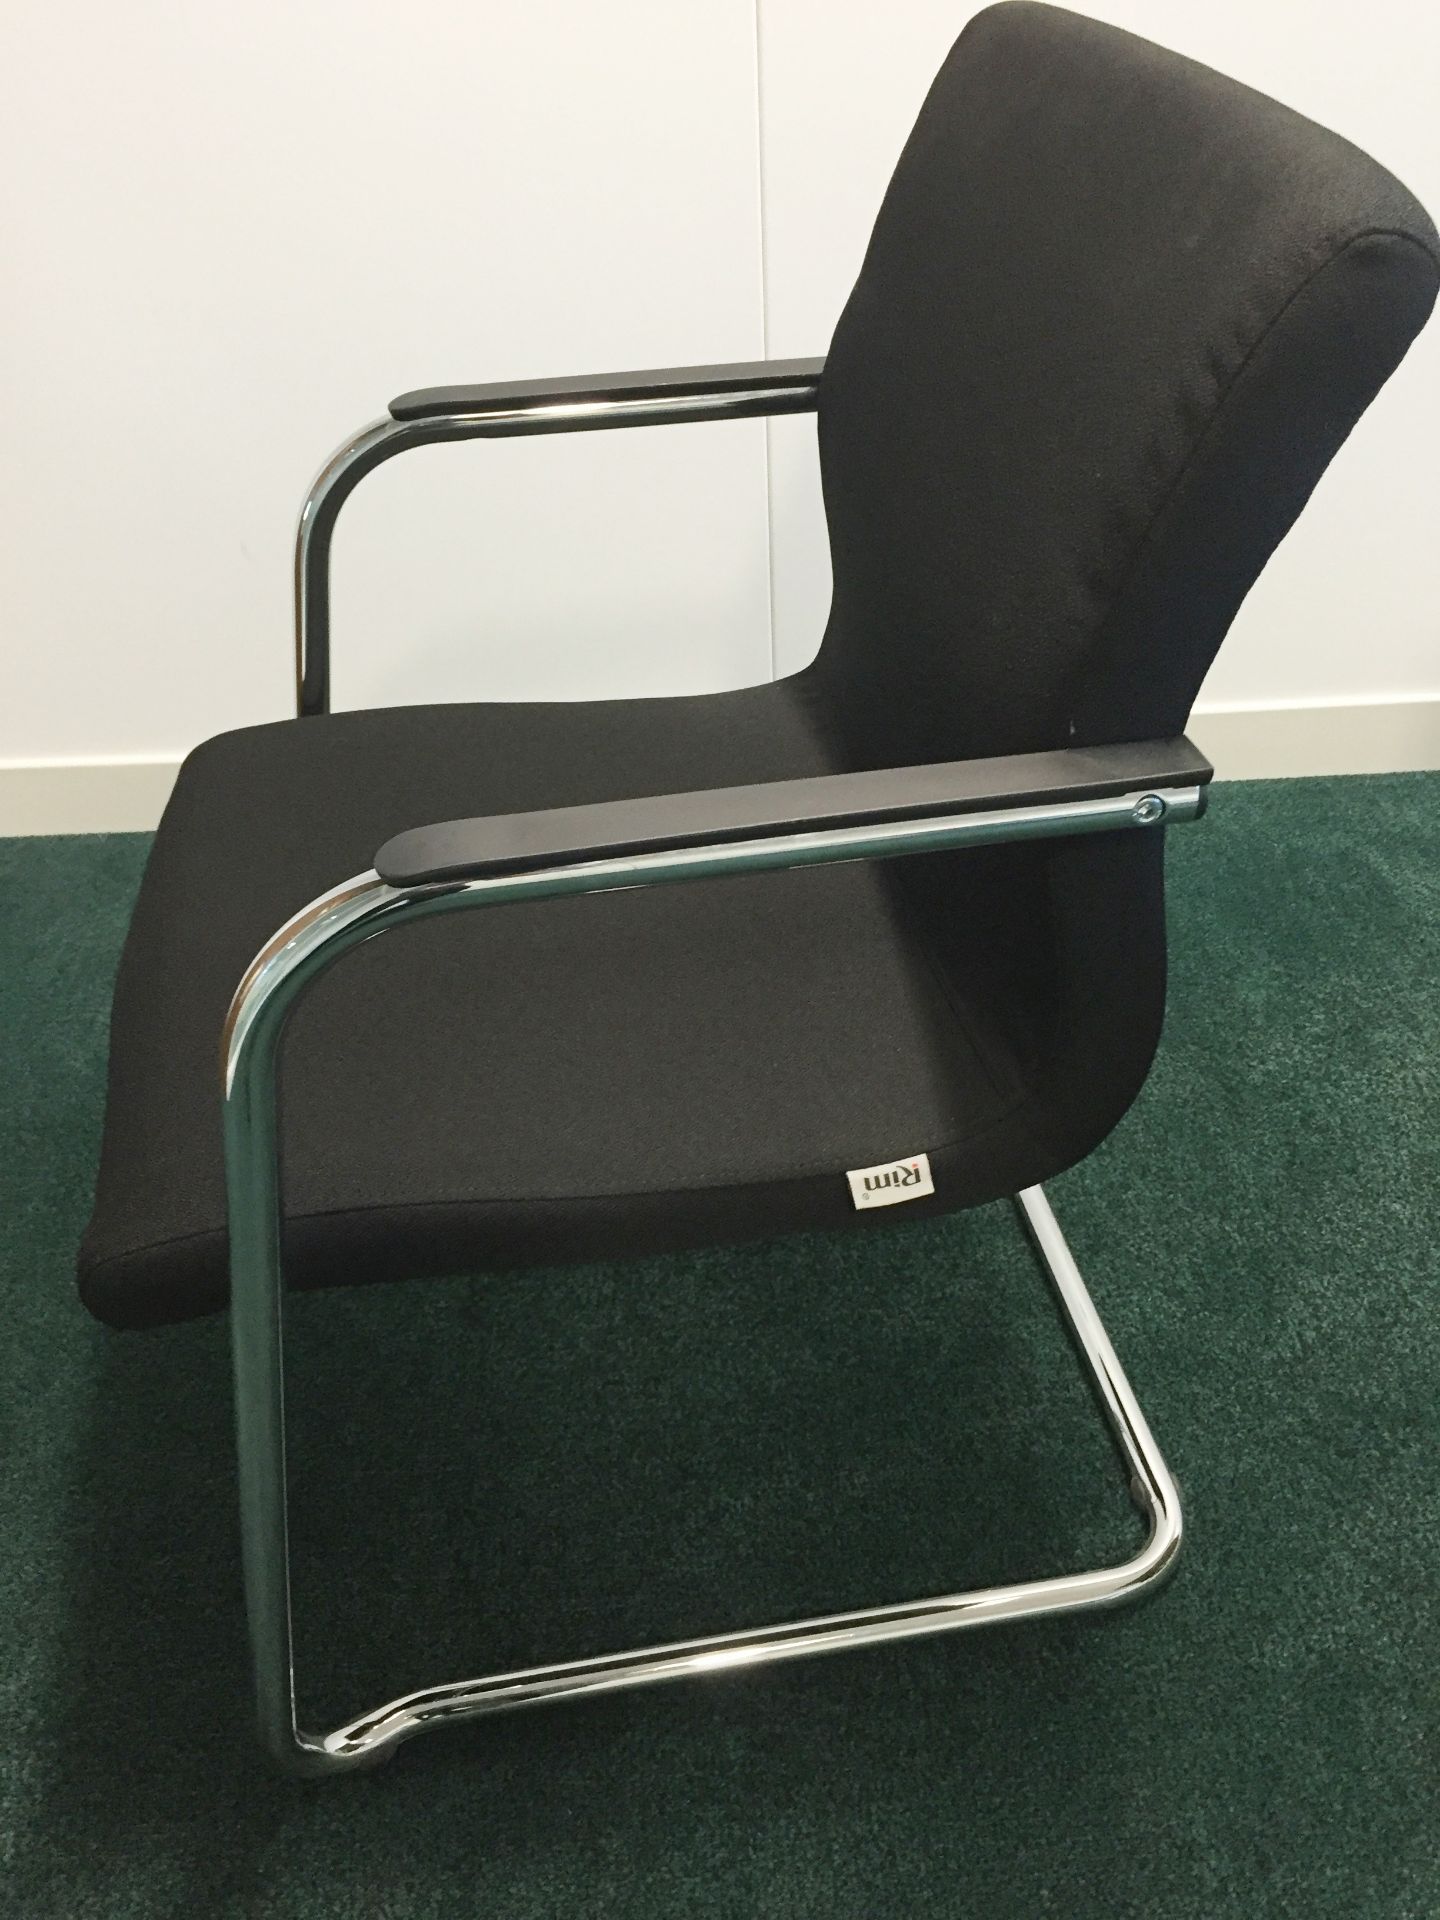 1 x Designer RIM Office Chair - Suitable For Desk Use, Meeting Tables or Conference Rooms - Features - Image 3 of 6